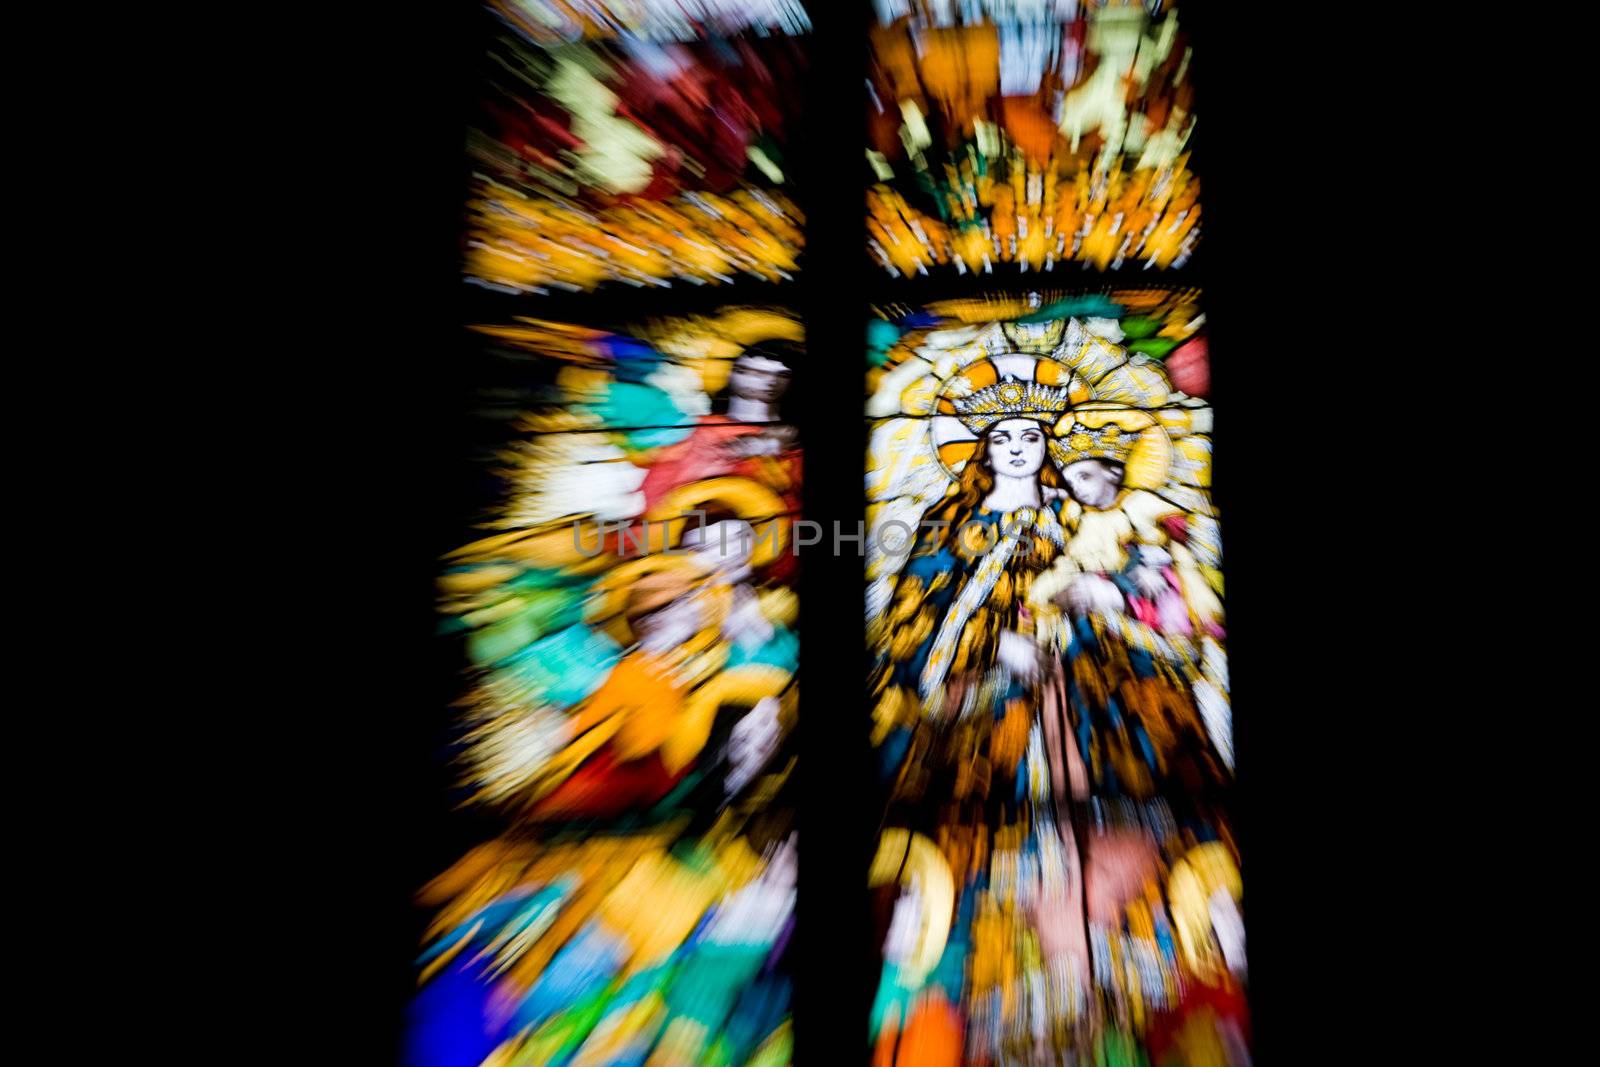 Stained glass with motion blur done with the camera, not photoshopped